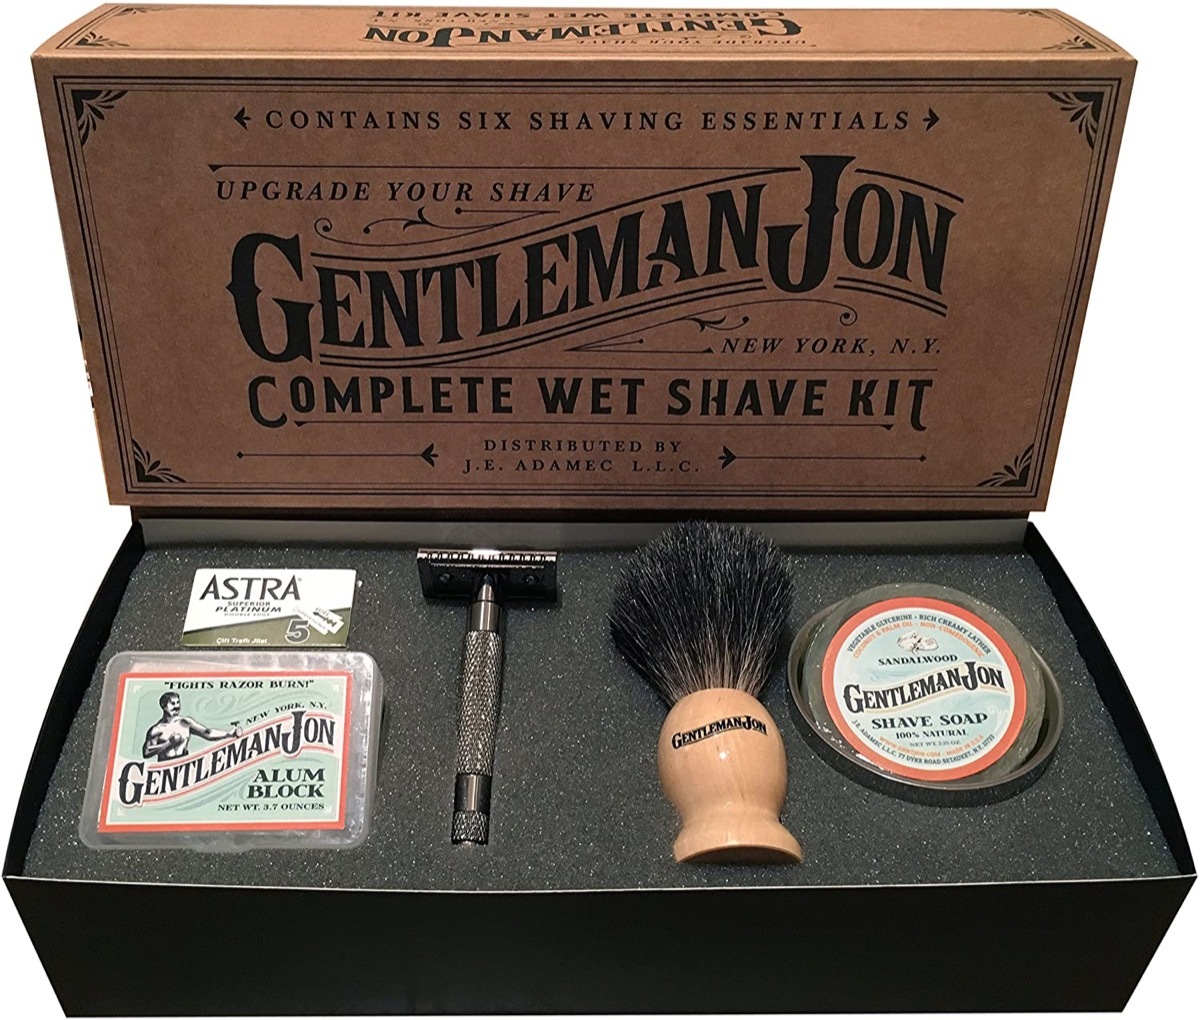 Shave kit with razor and accessories